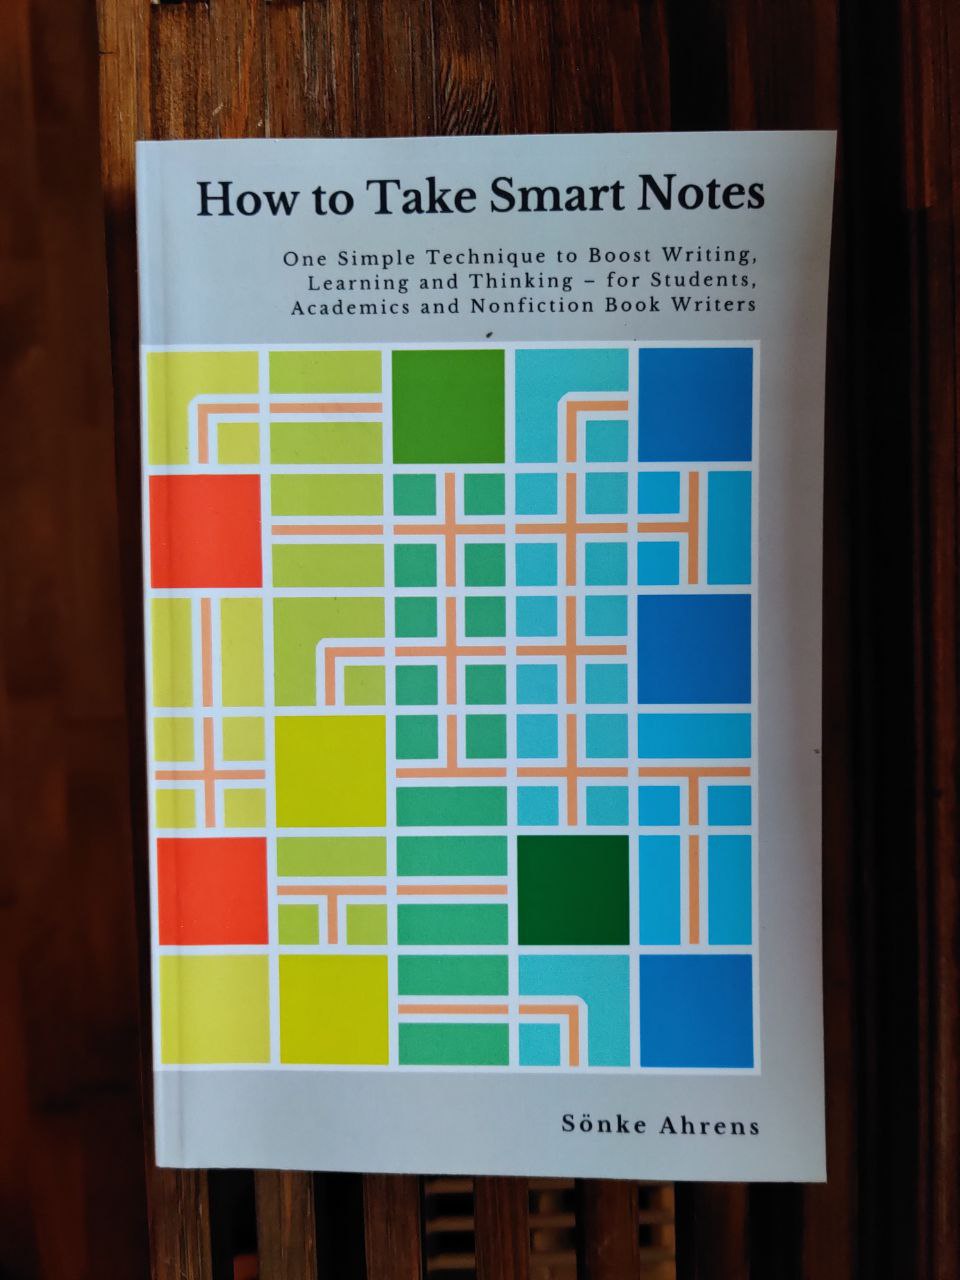 “How to Take Smart Notes” cover